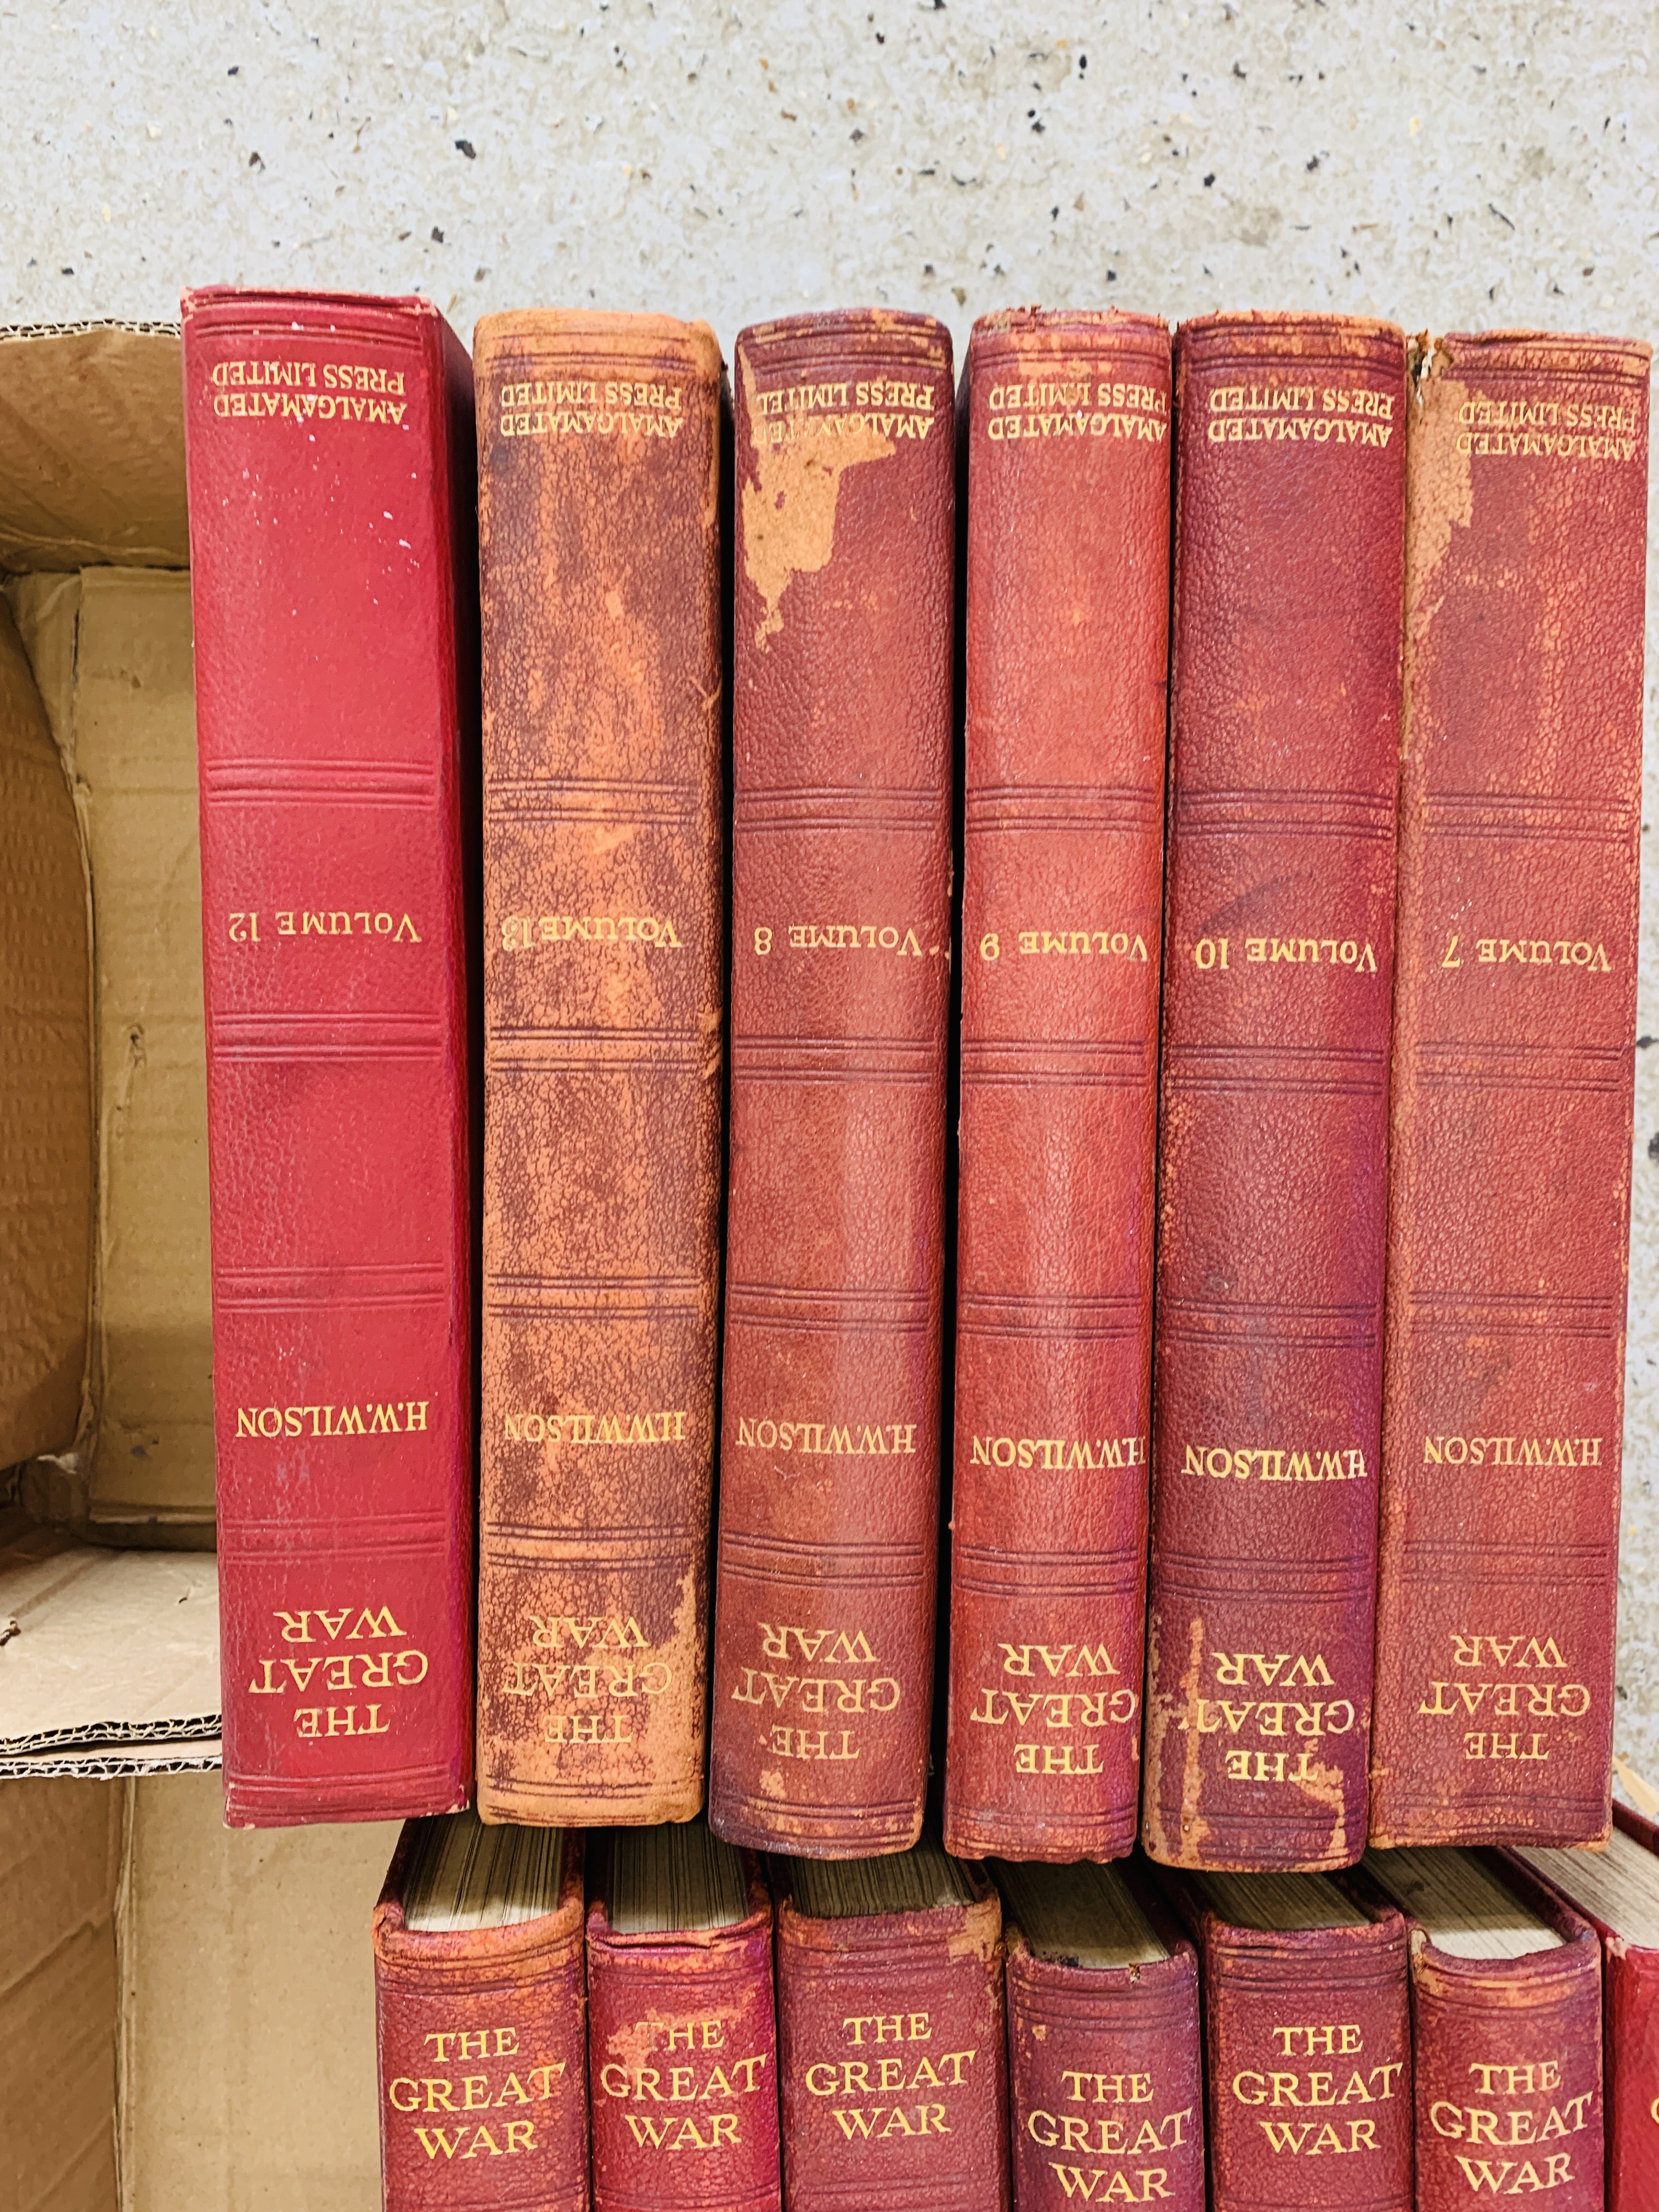 13 VOLUMES OF "THE GREAT WAR" H.W. - Image 3 of 5